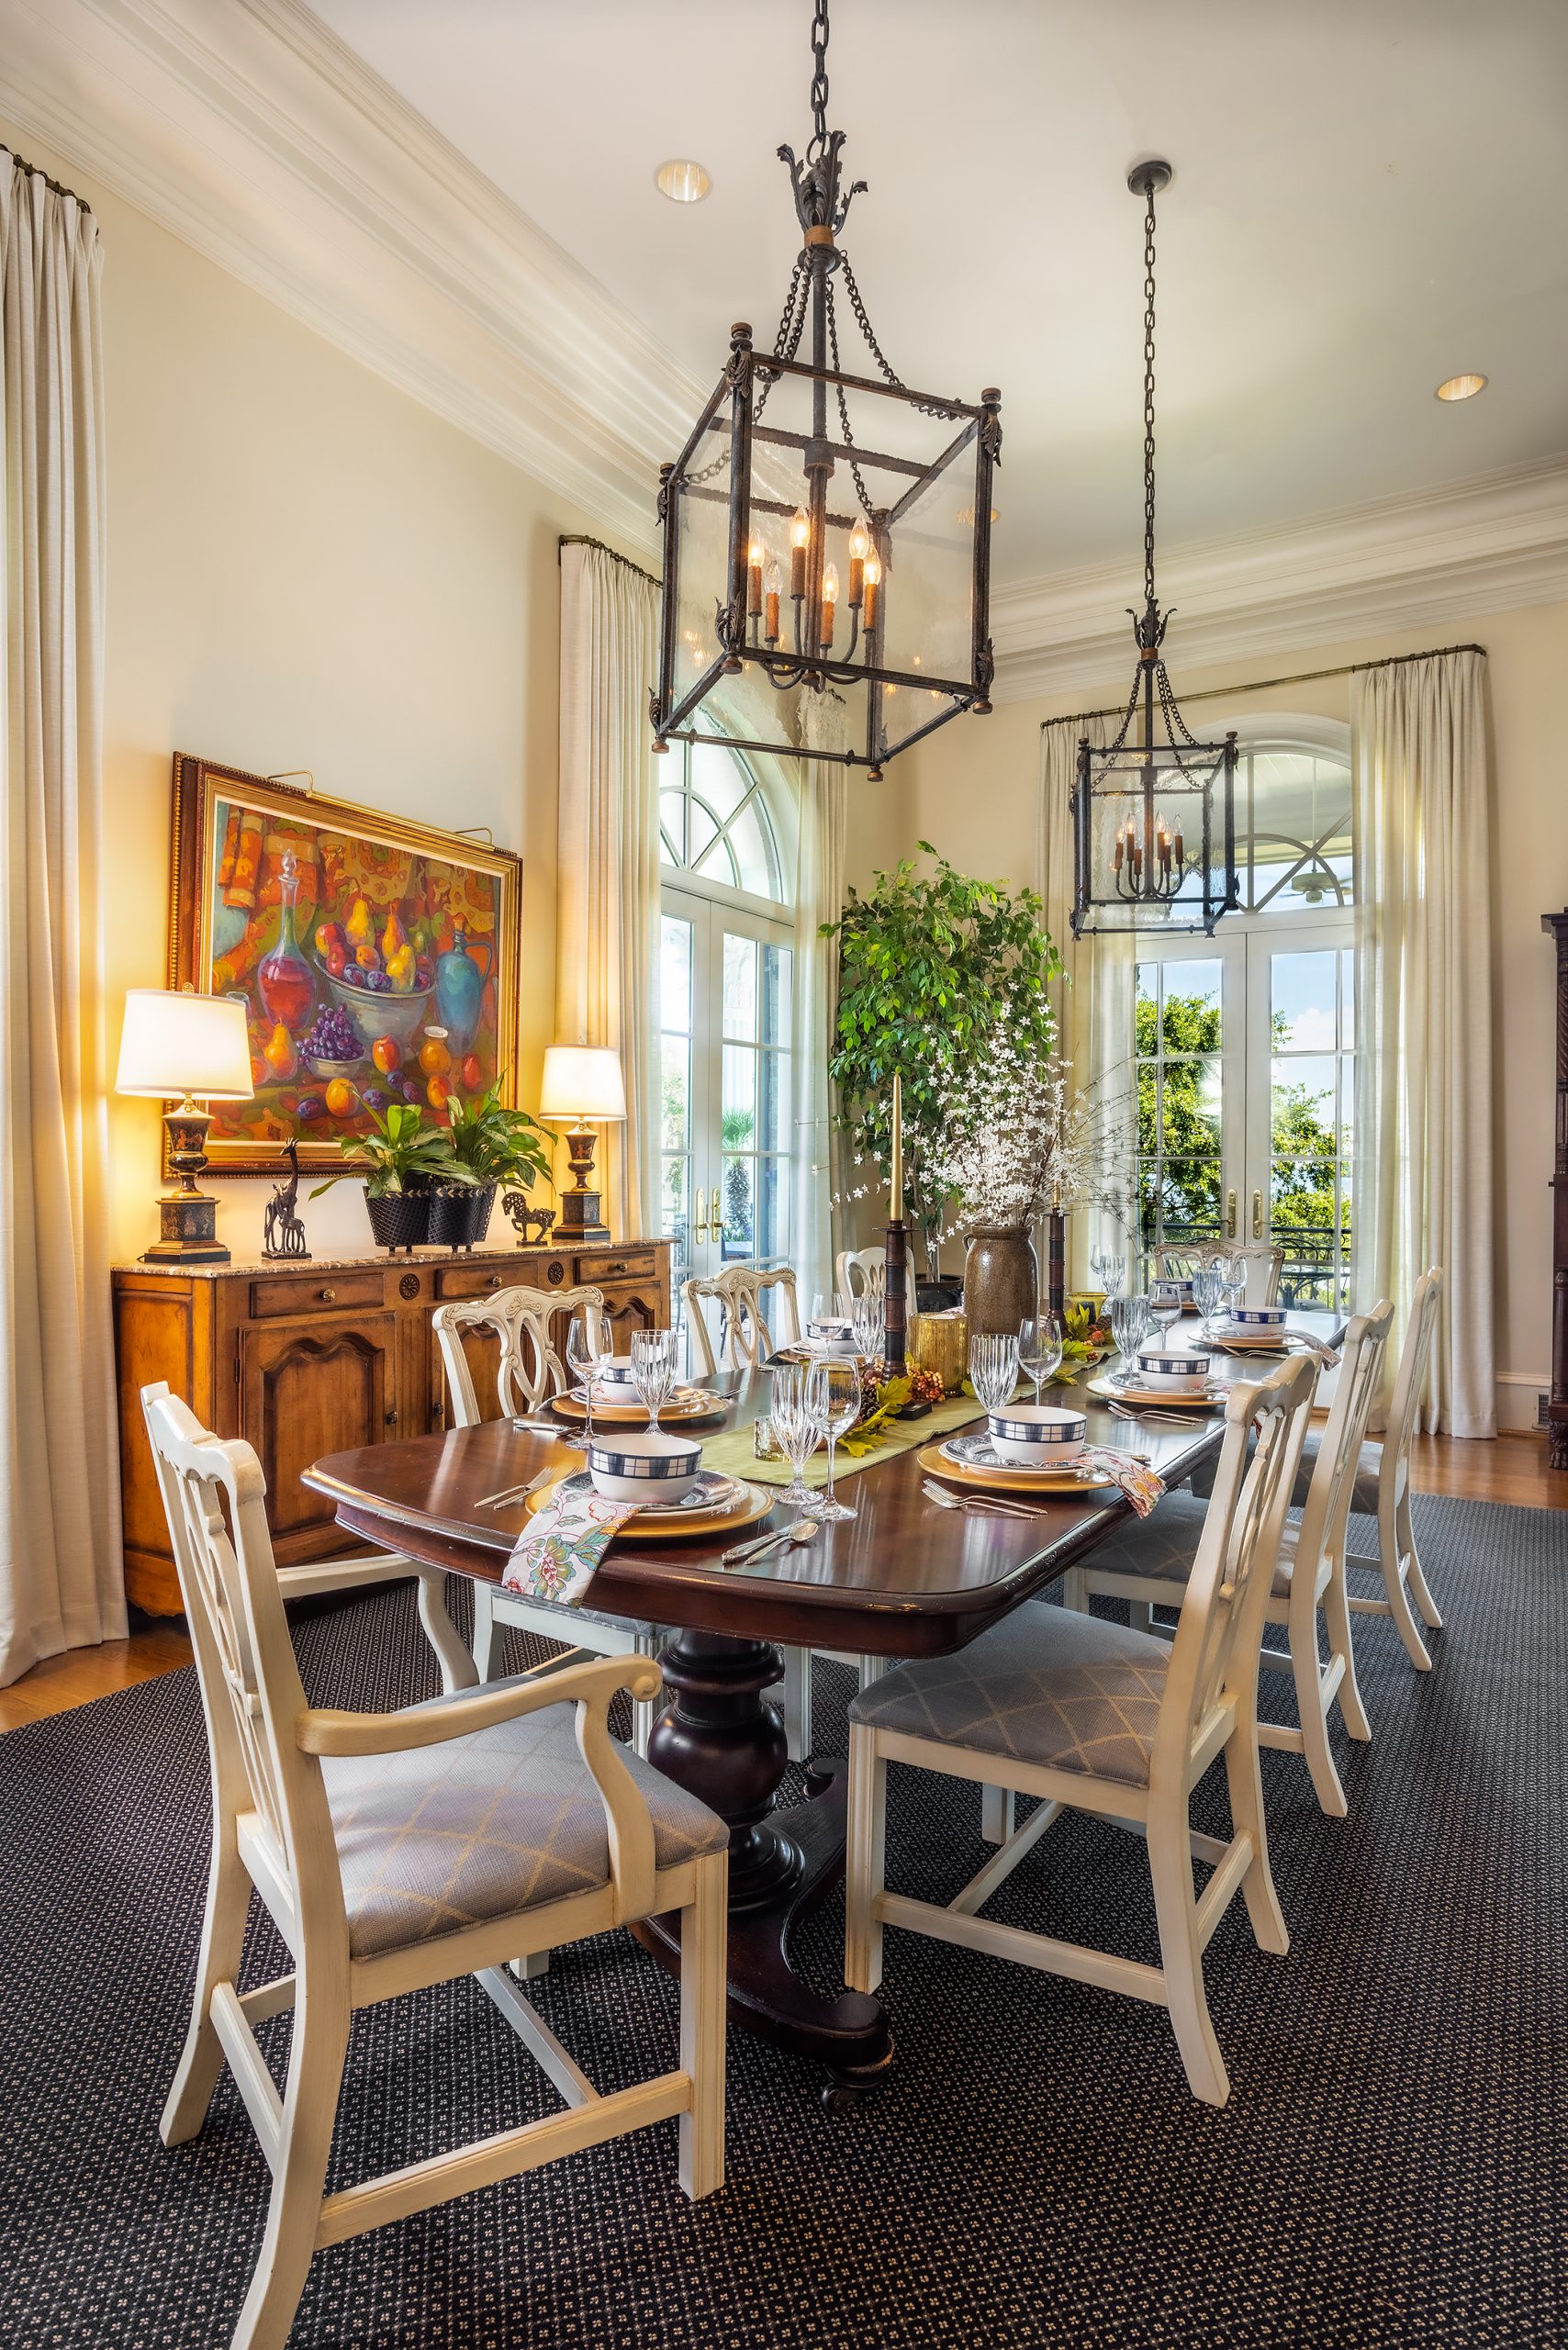 Natural light floods the breakfast room, adjacent to the family room and kitchen. Multiple Palladian French doors crest just below the 14-foot ceilings. Circulation from the wraparound porches, with stunning lake views, is accessible with the turn of a doorknob.